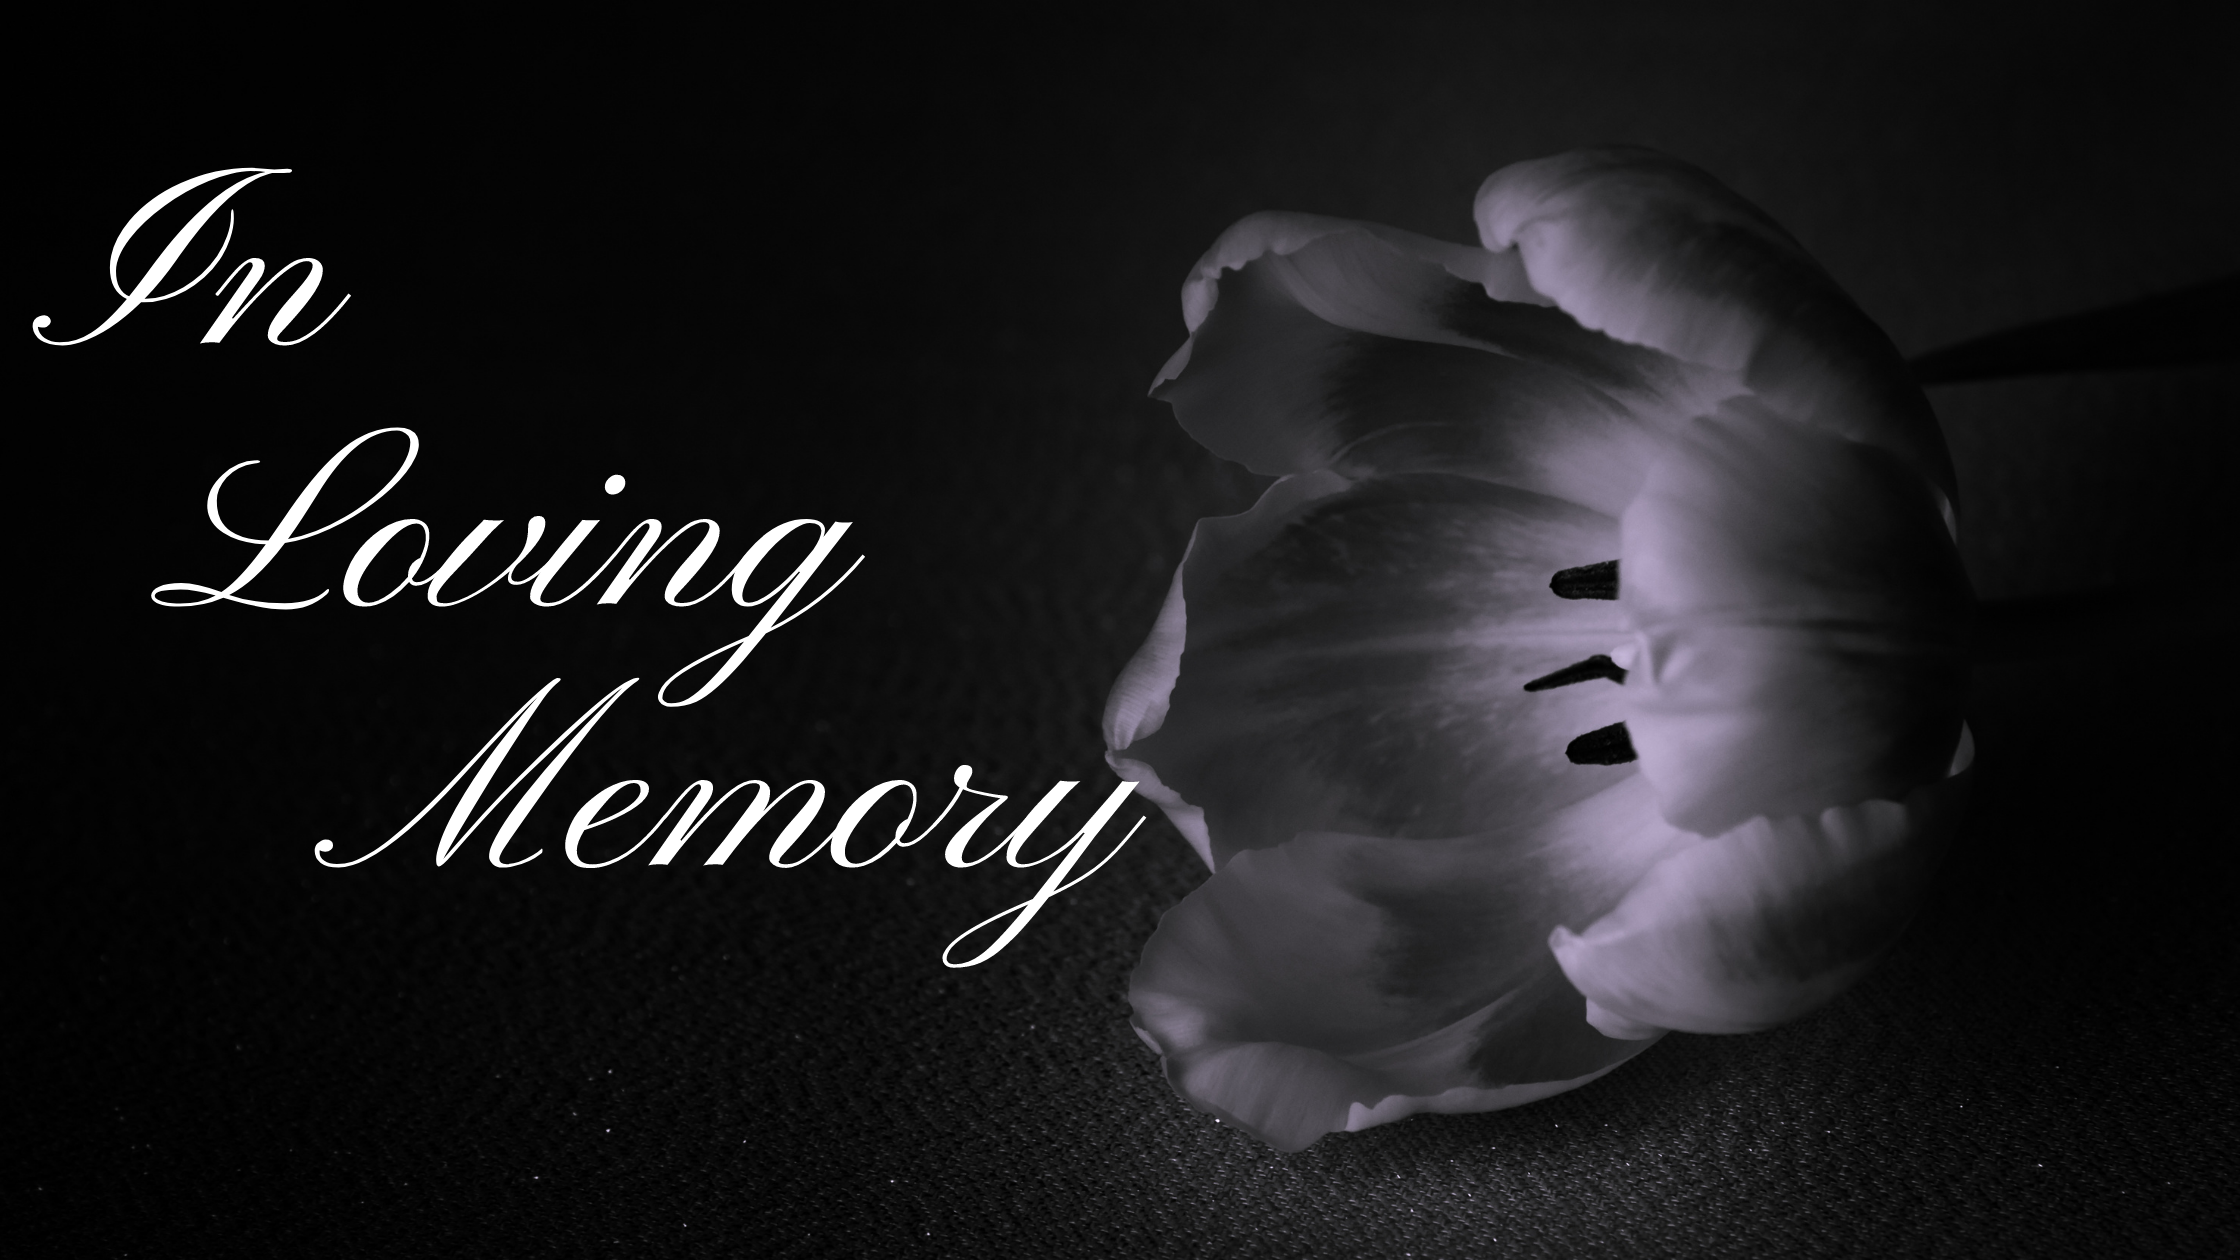 An open flower with the words "In Loving Memory" over it